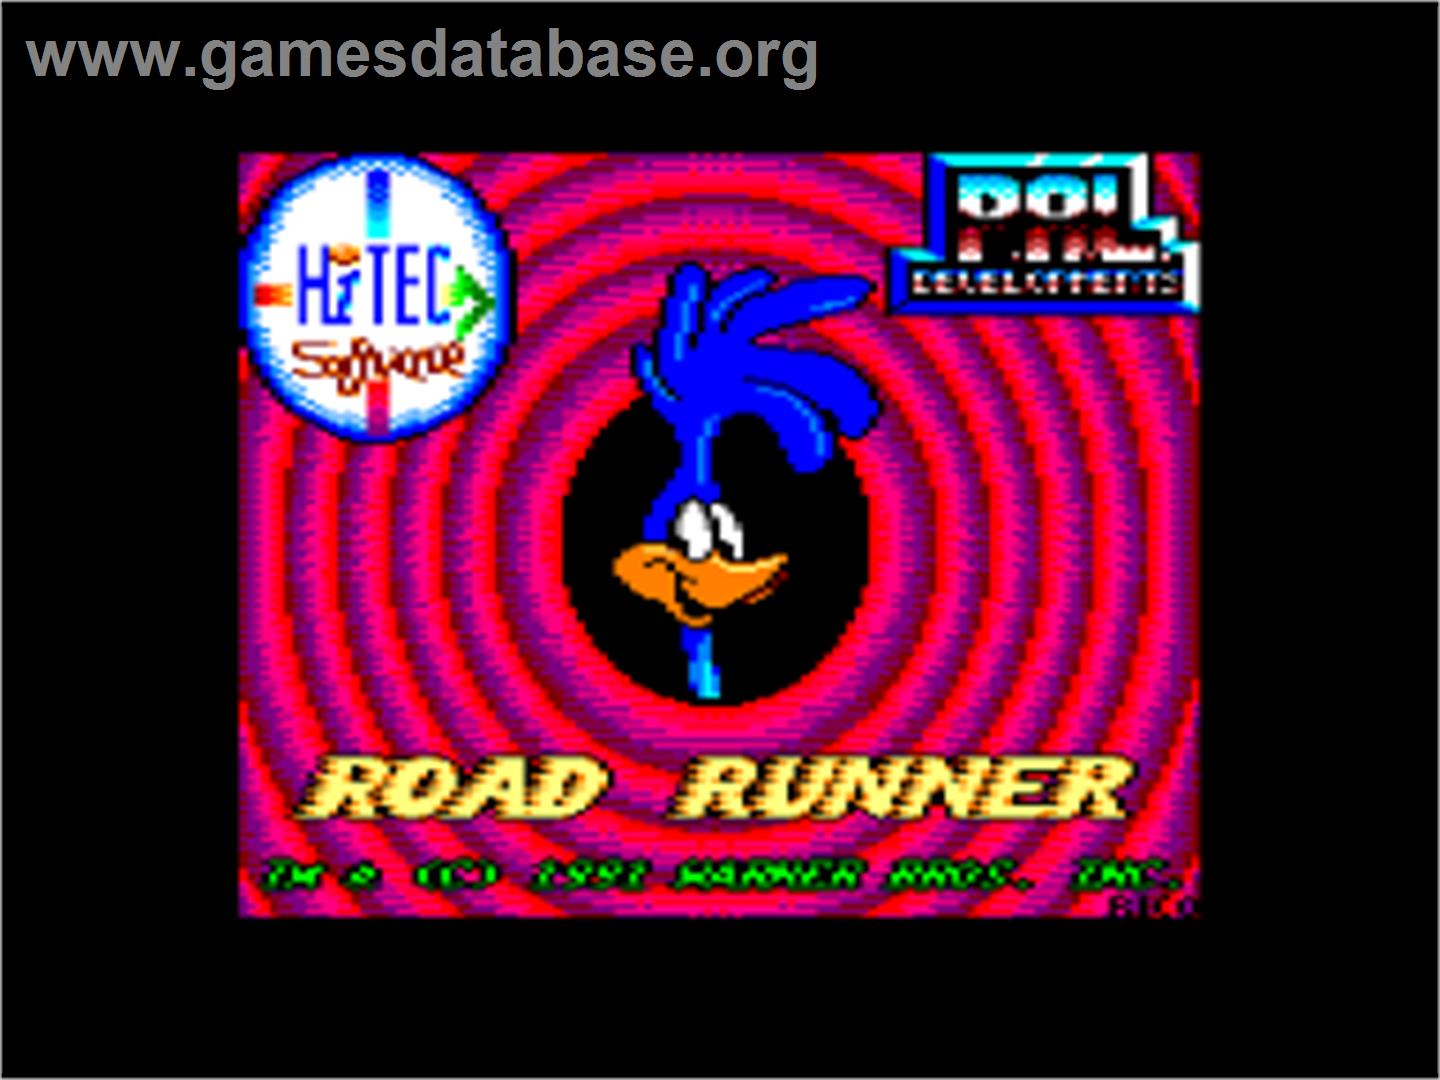 Road Runner and Wile E. Coyote - Amstrad CPC - Artwork - Title Screen